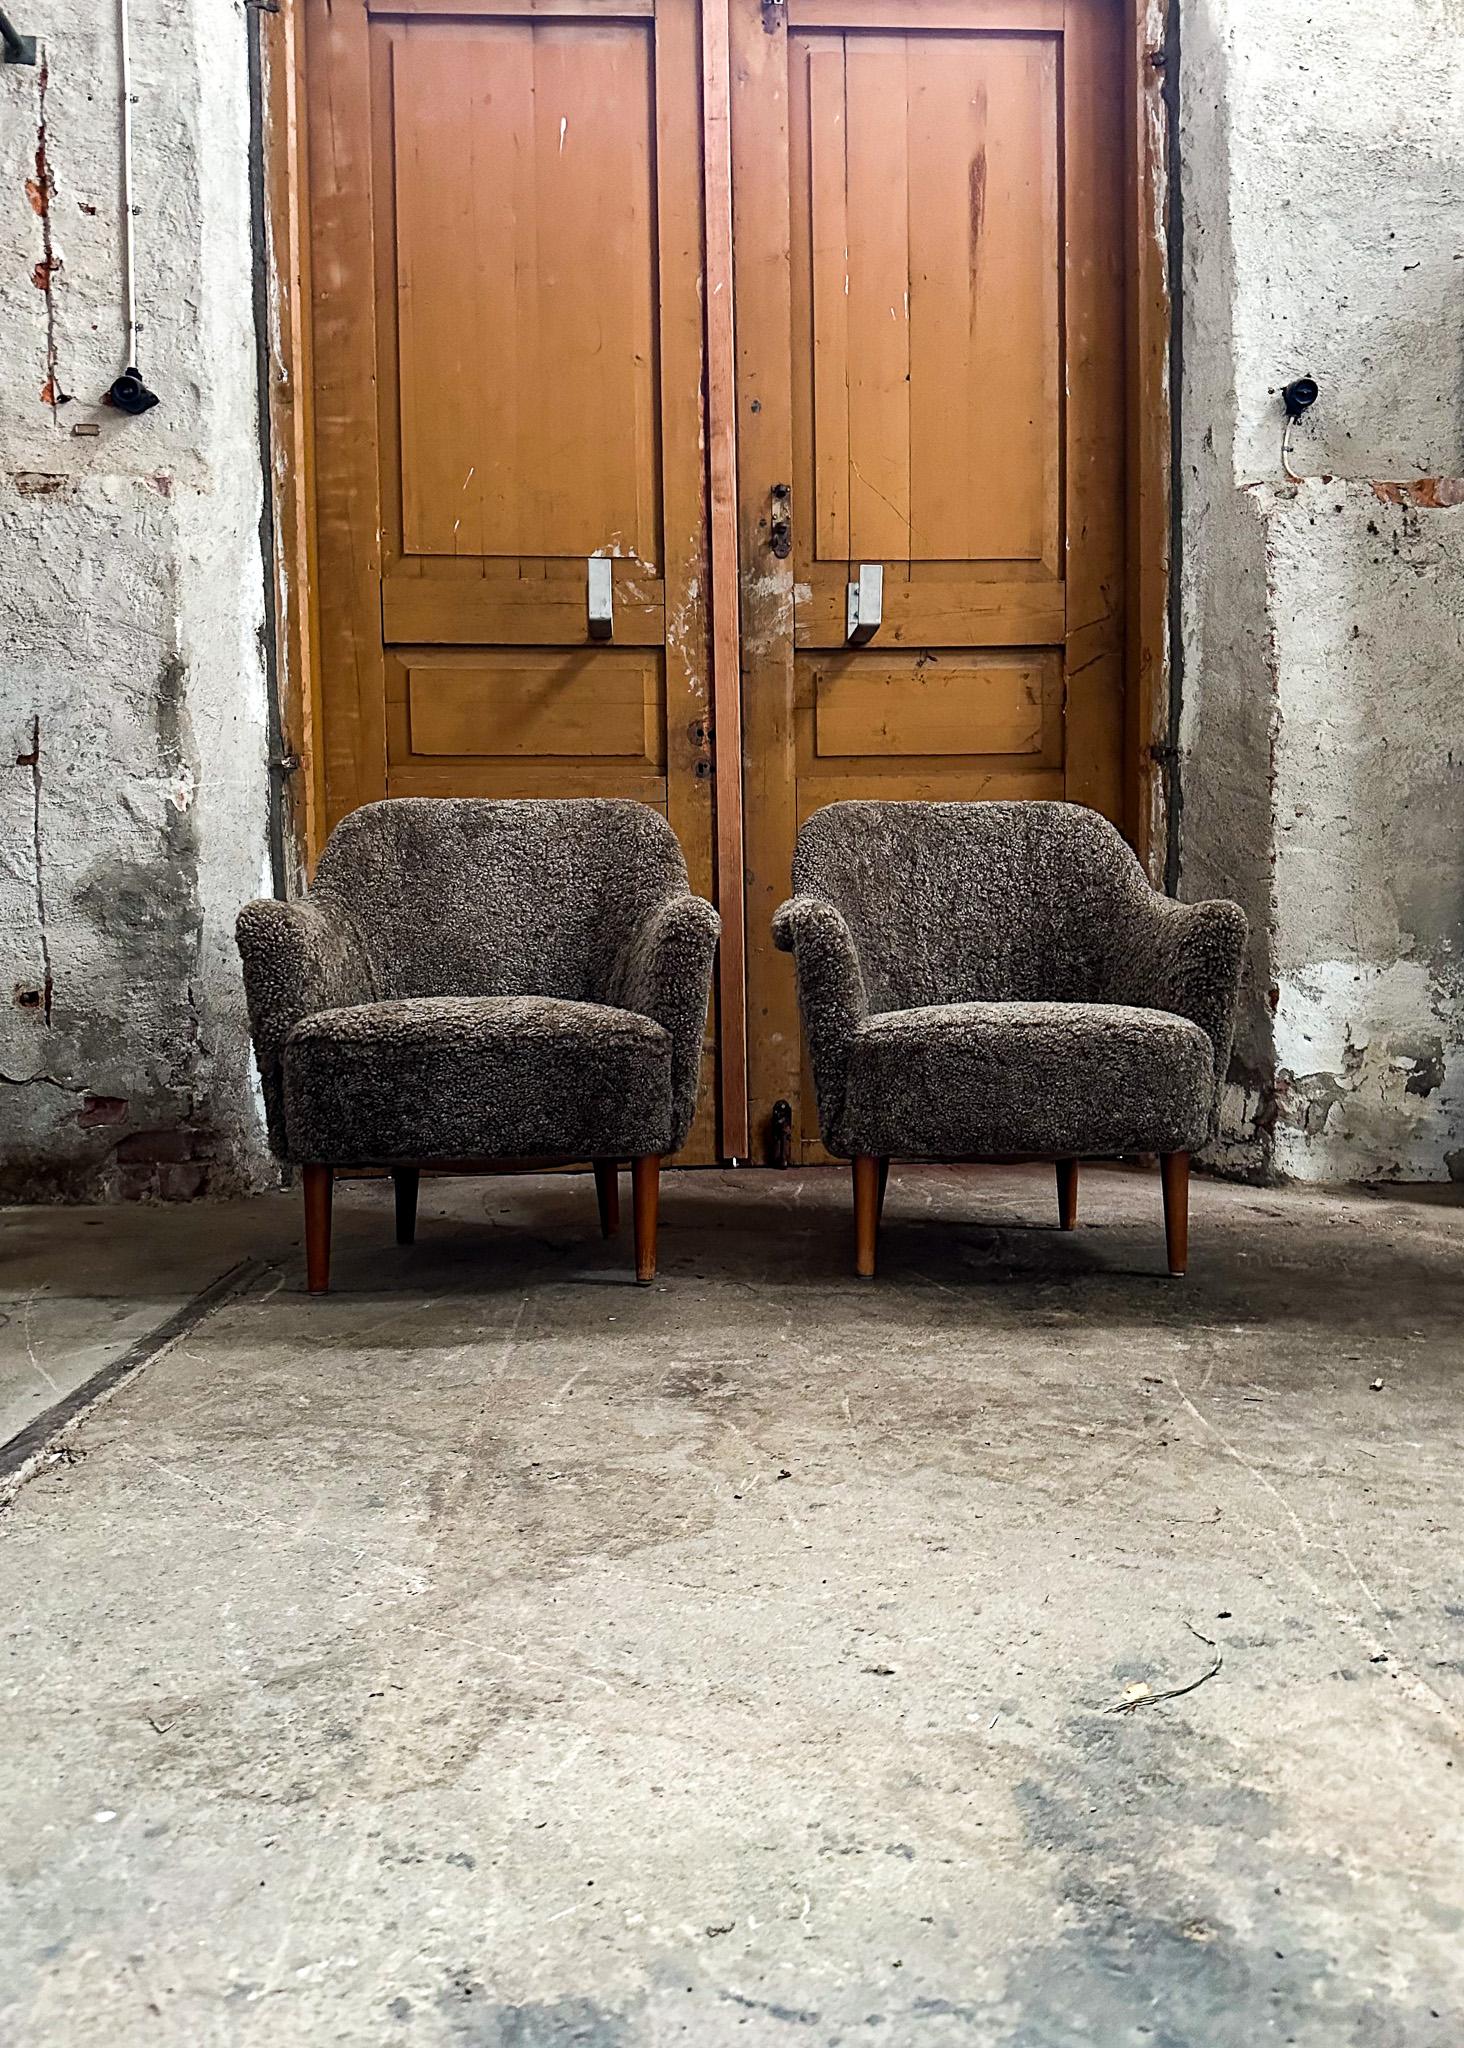 This model” Samspel” lounge chairs was designed by Carl Malmsten in 1956 and manufactured during that time at AB Record Bollnäs Sweden. These two chairs have been fully reupholstered and now have its beautiful famous lines made in 